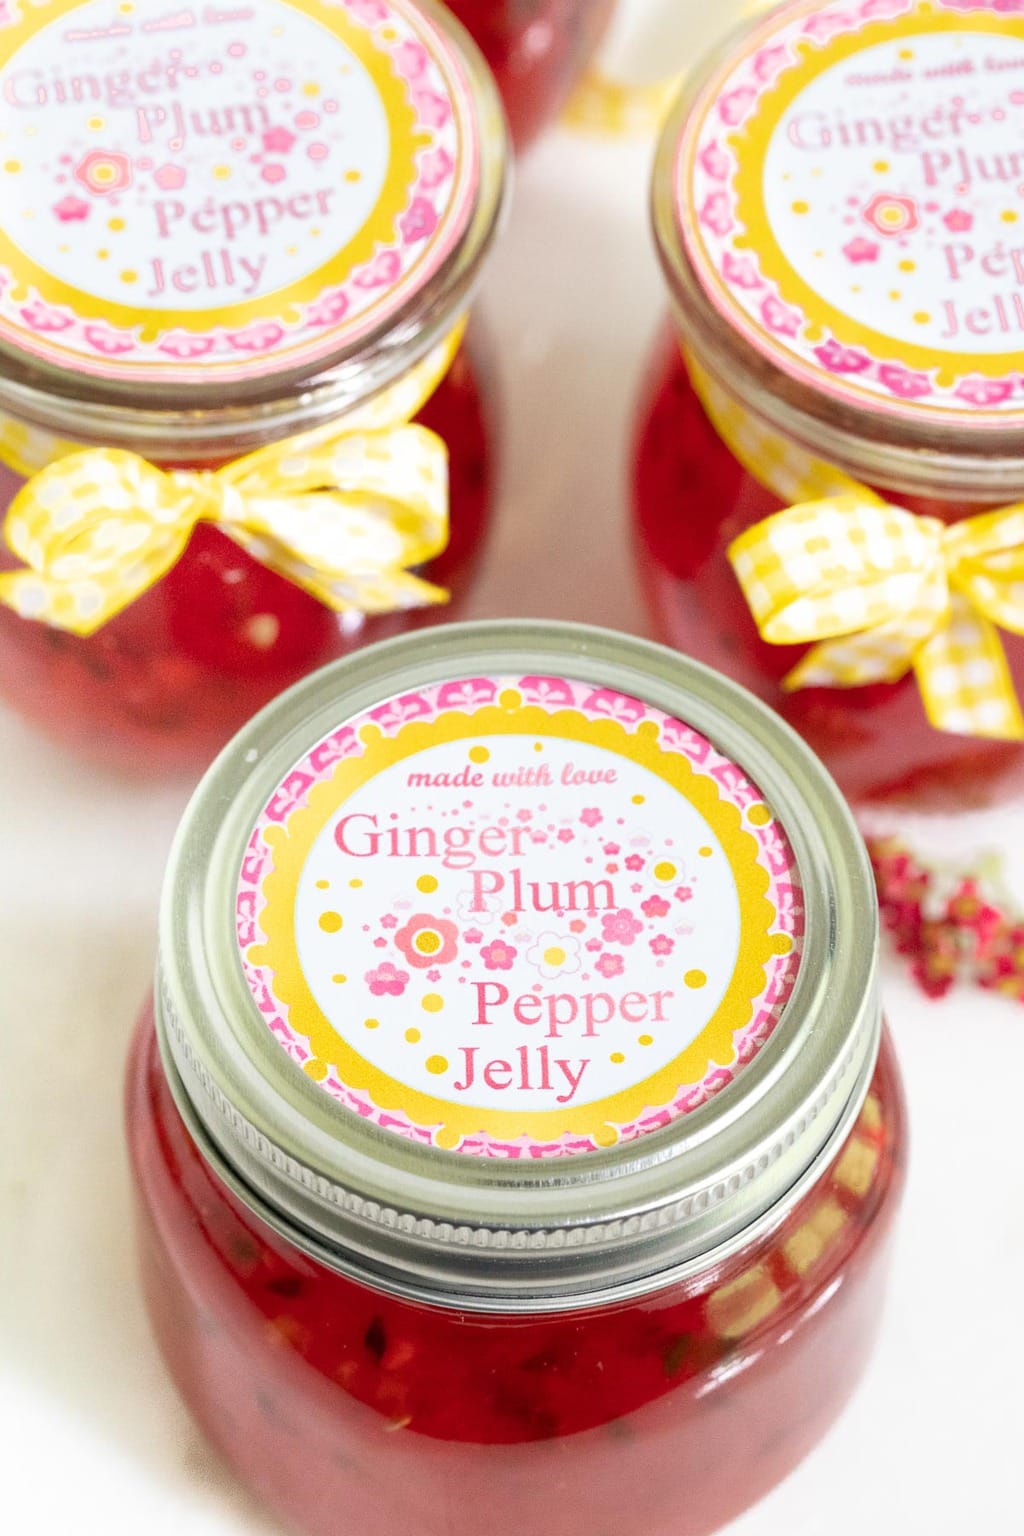 Extreme closeup photo of the top label on jars of Plum Ginger Pepper Jelly decorated with yellow and white checkered ribbons.